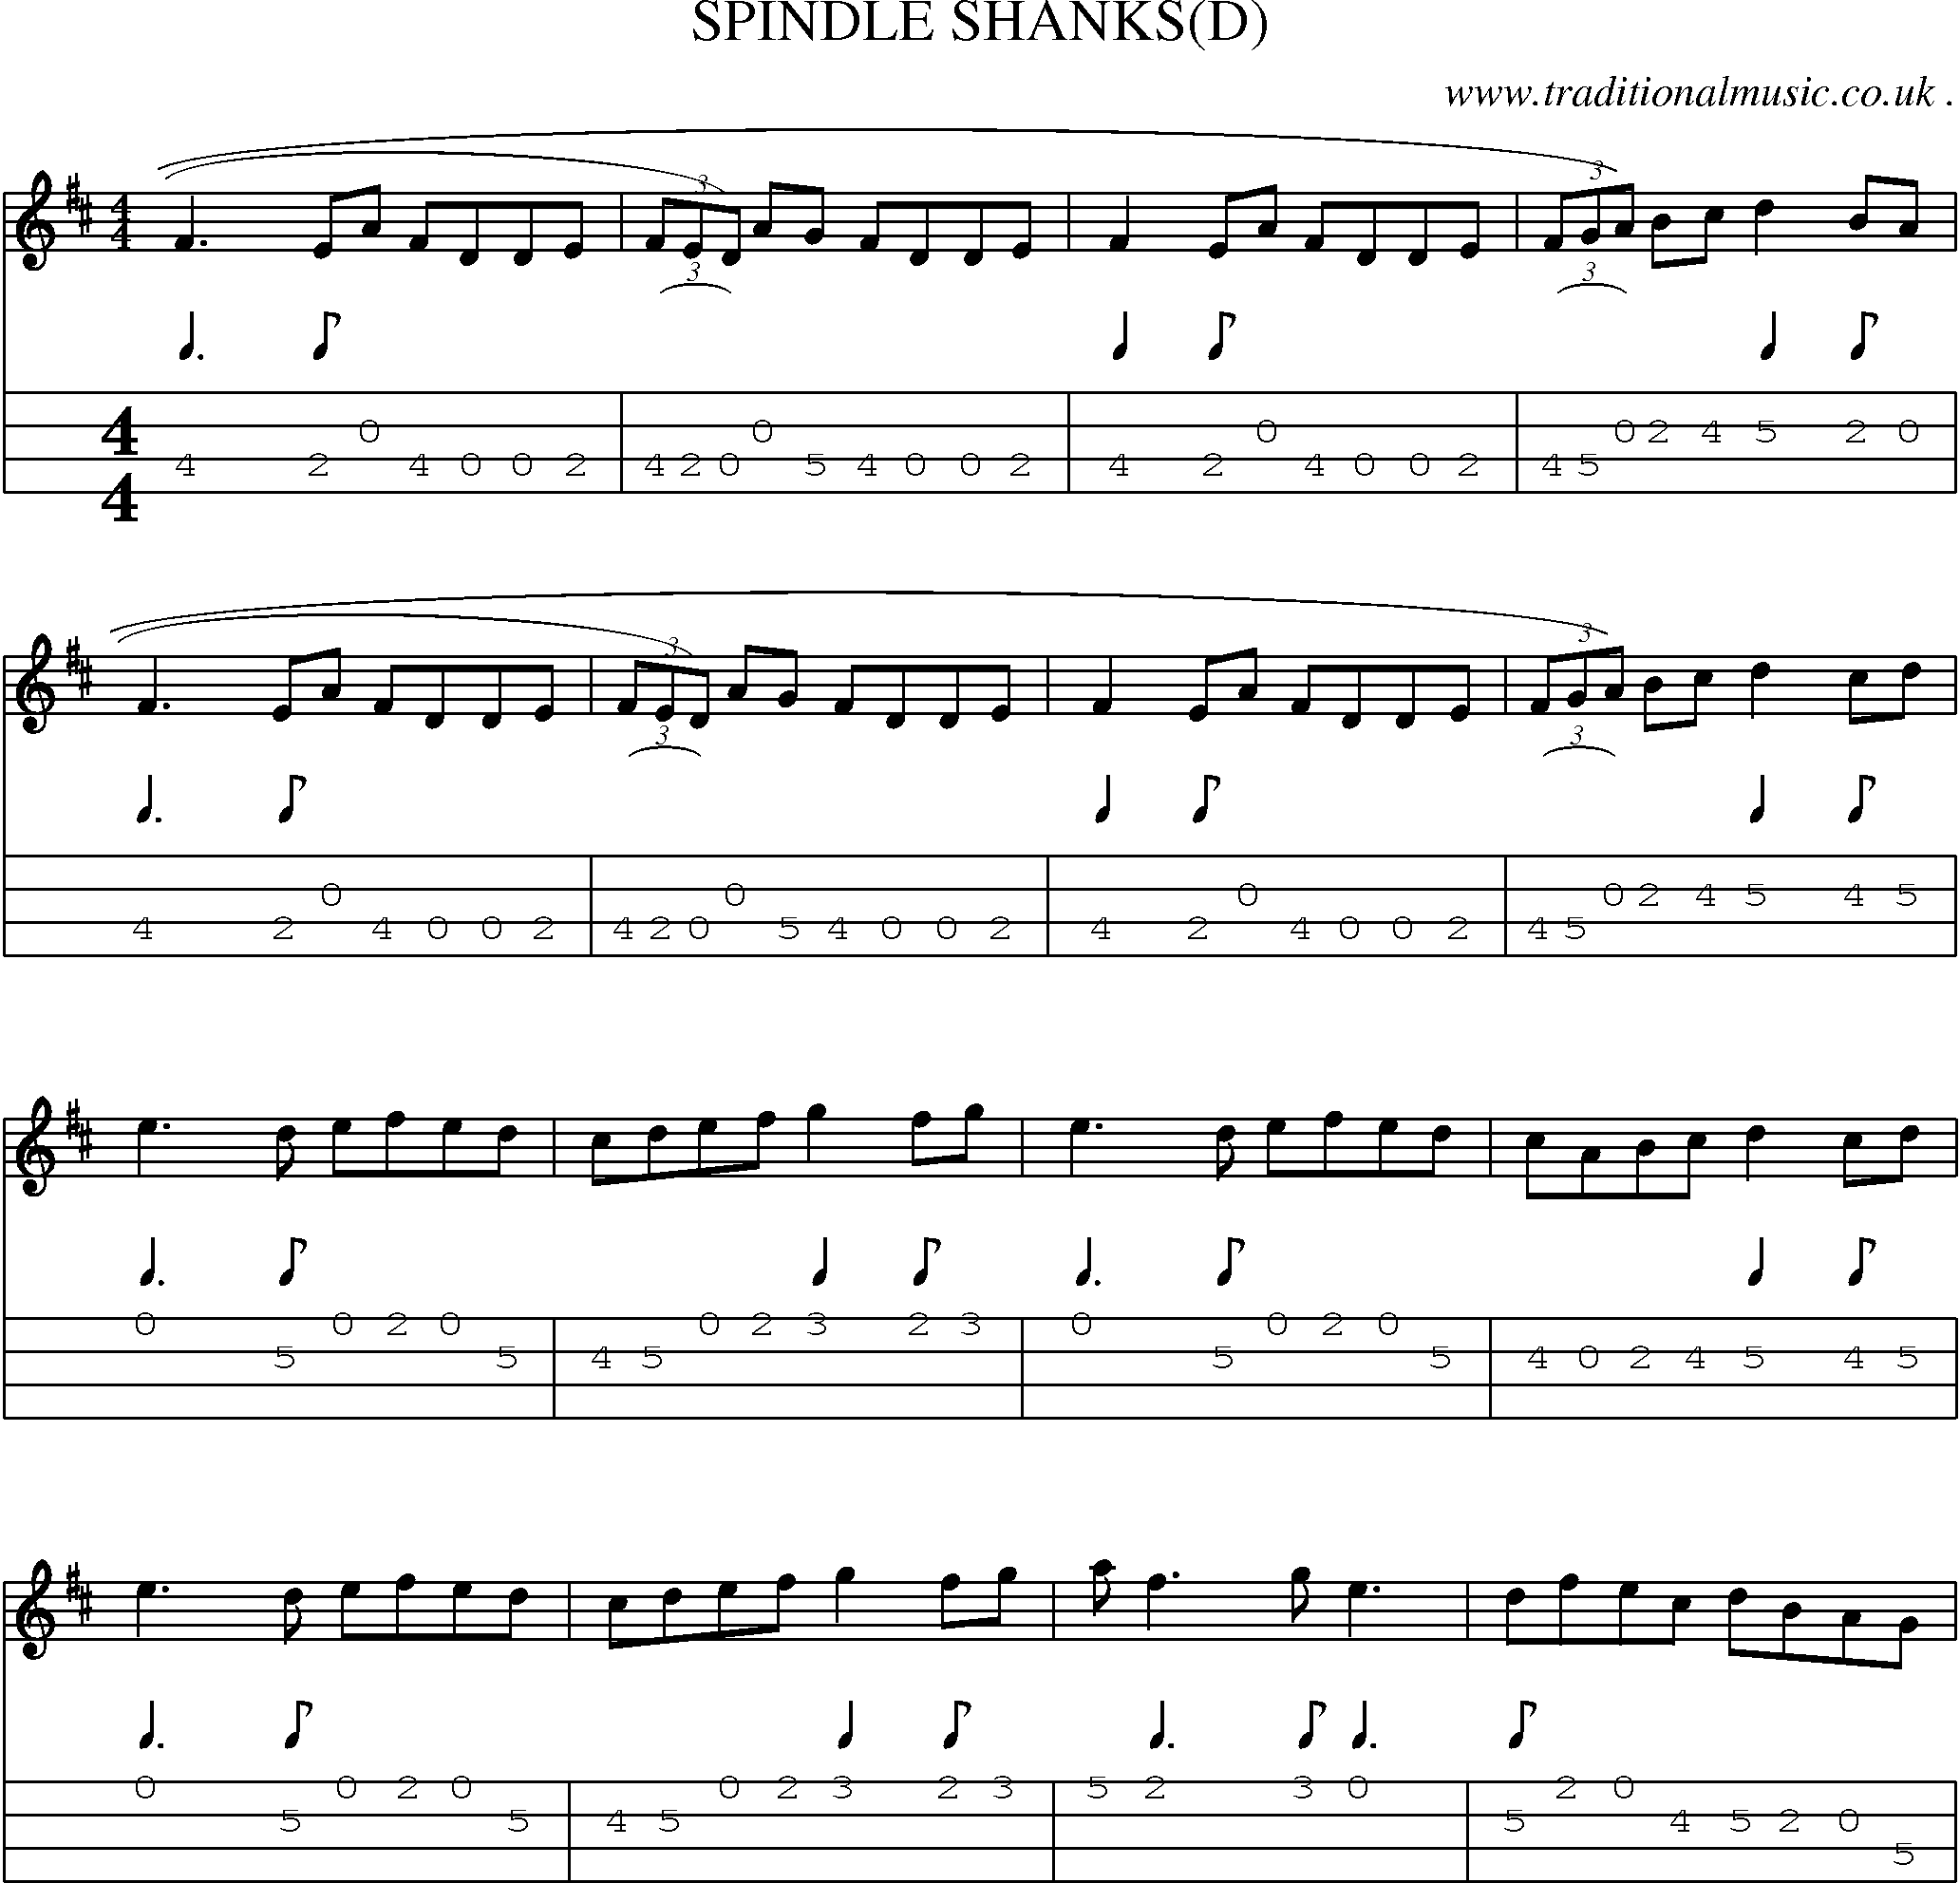 Sheet-Music and Mandolin Tabs for Spindle Shanks(d)